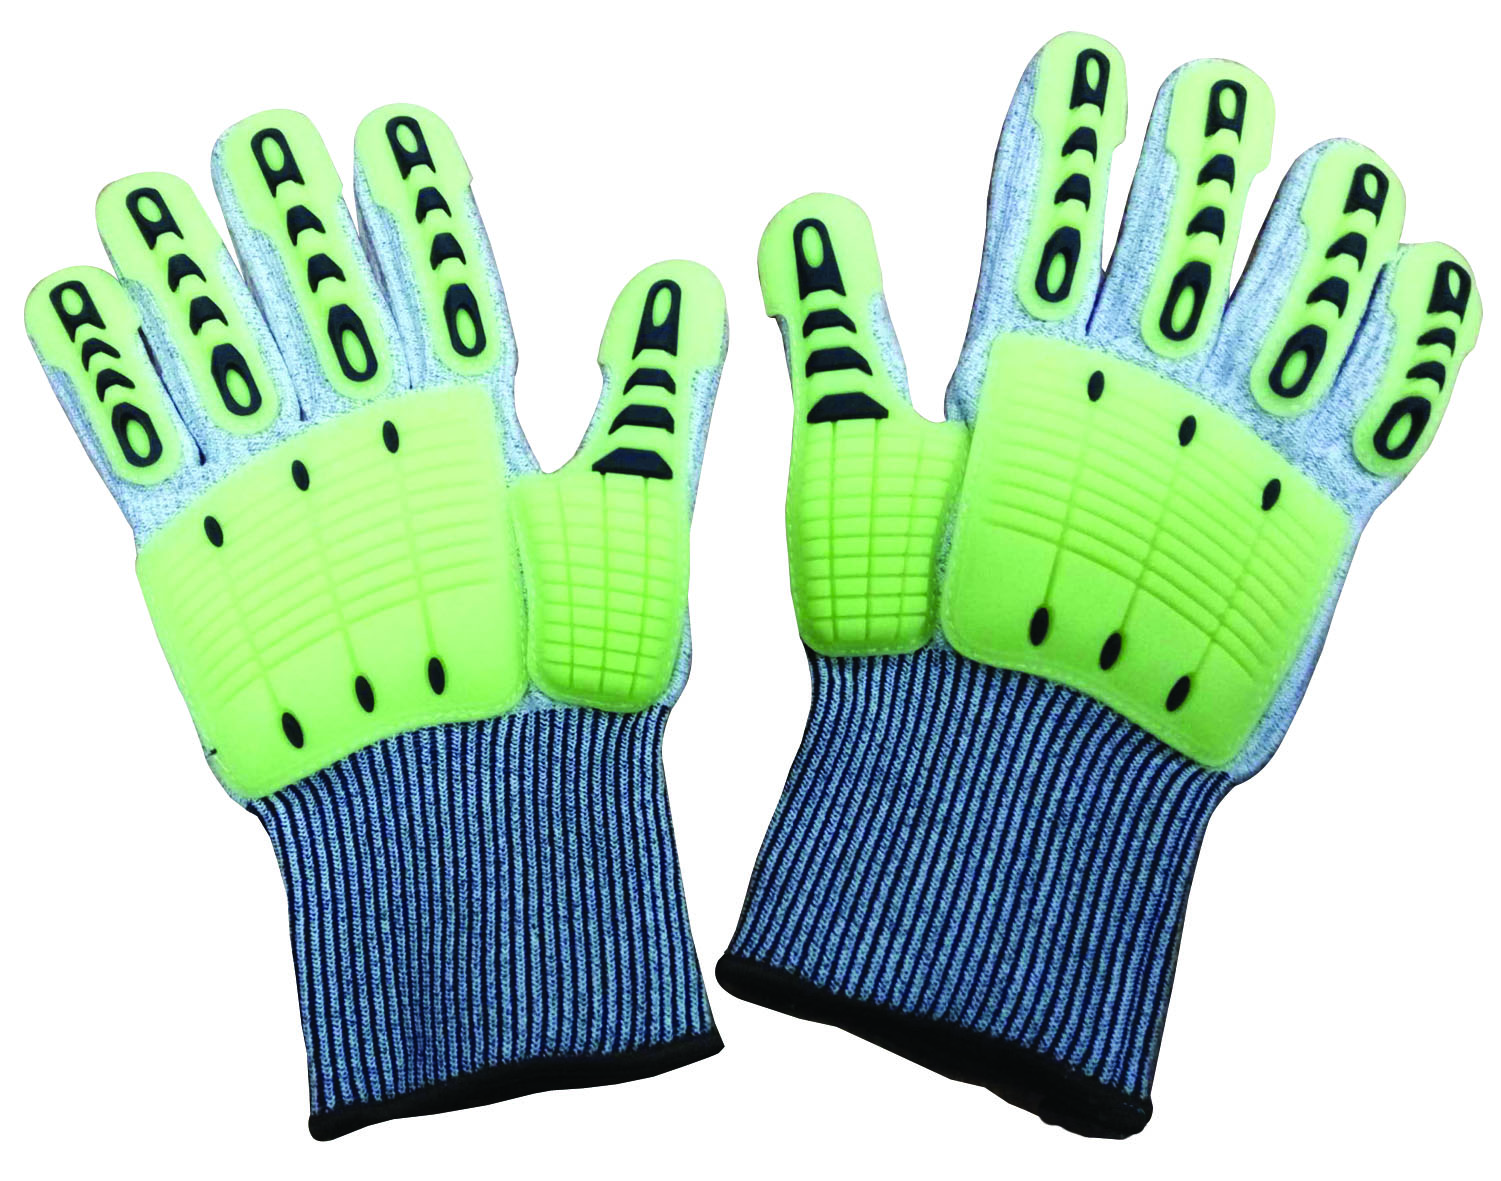 TPR Highly Visibility Anti Impact Resistant Mechanic Cut Resistant Safety Gloves